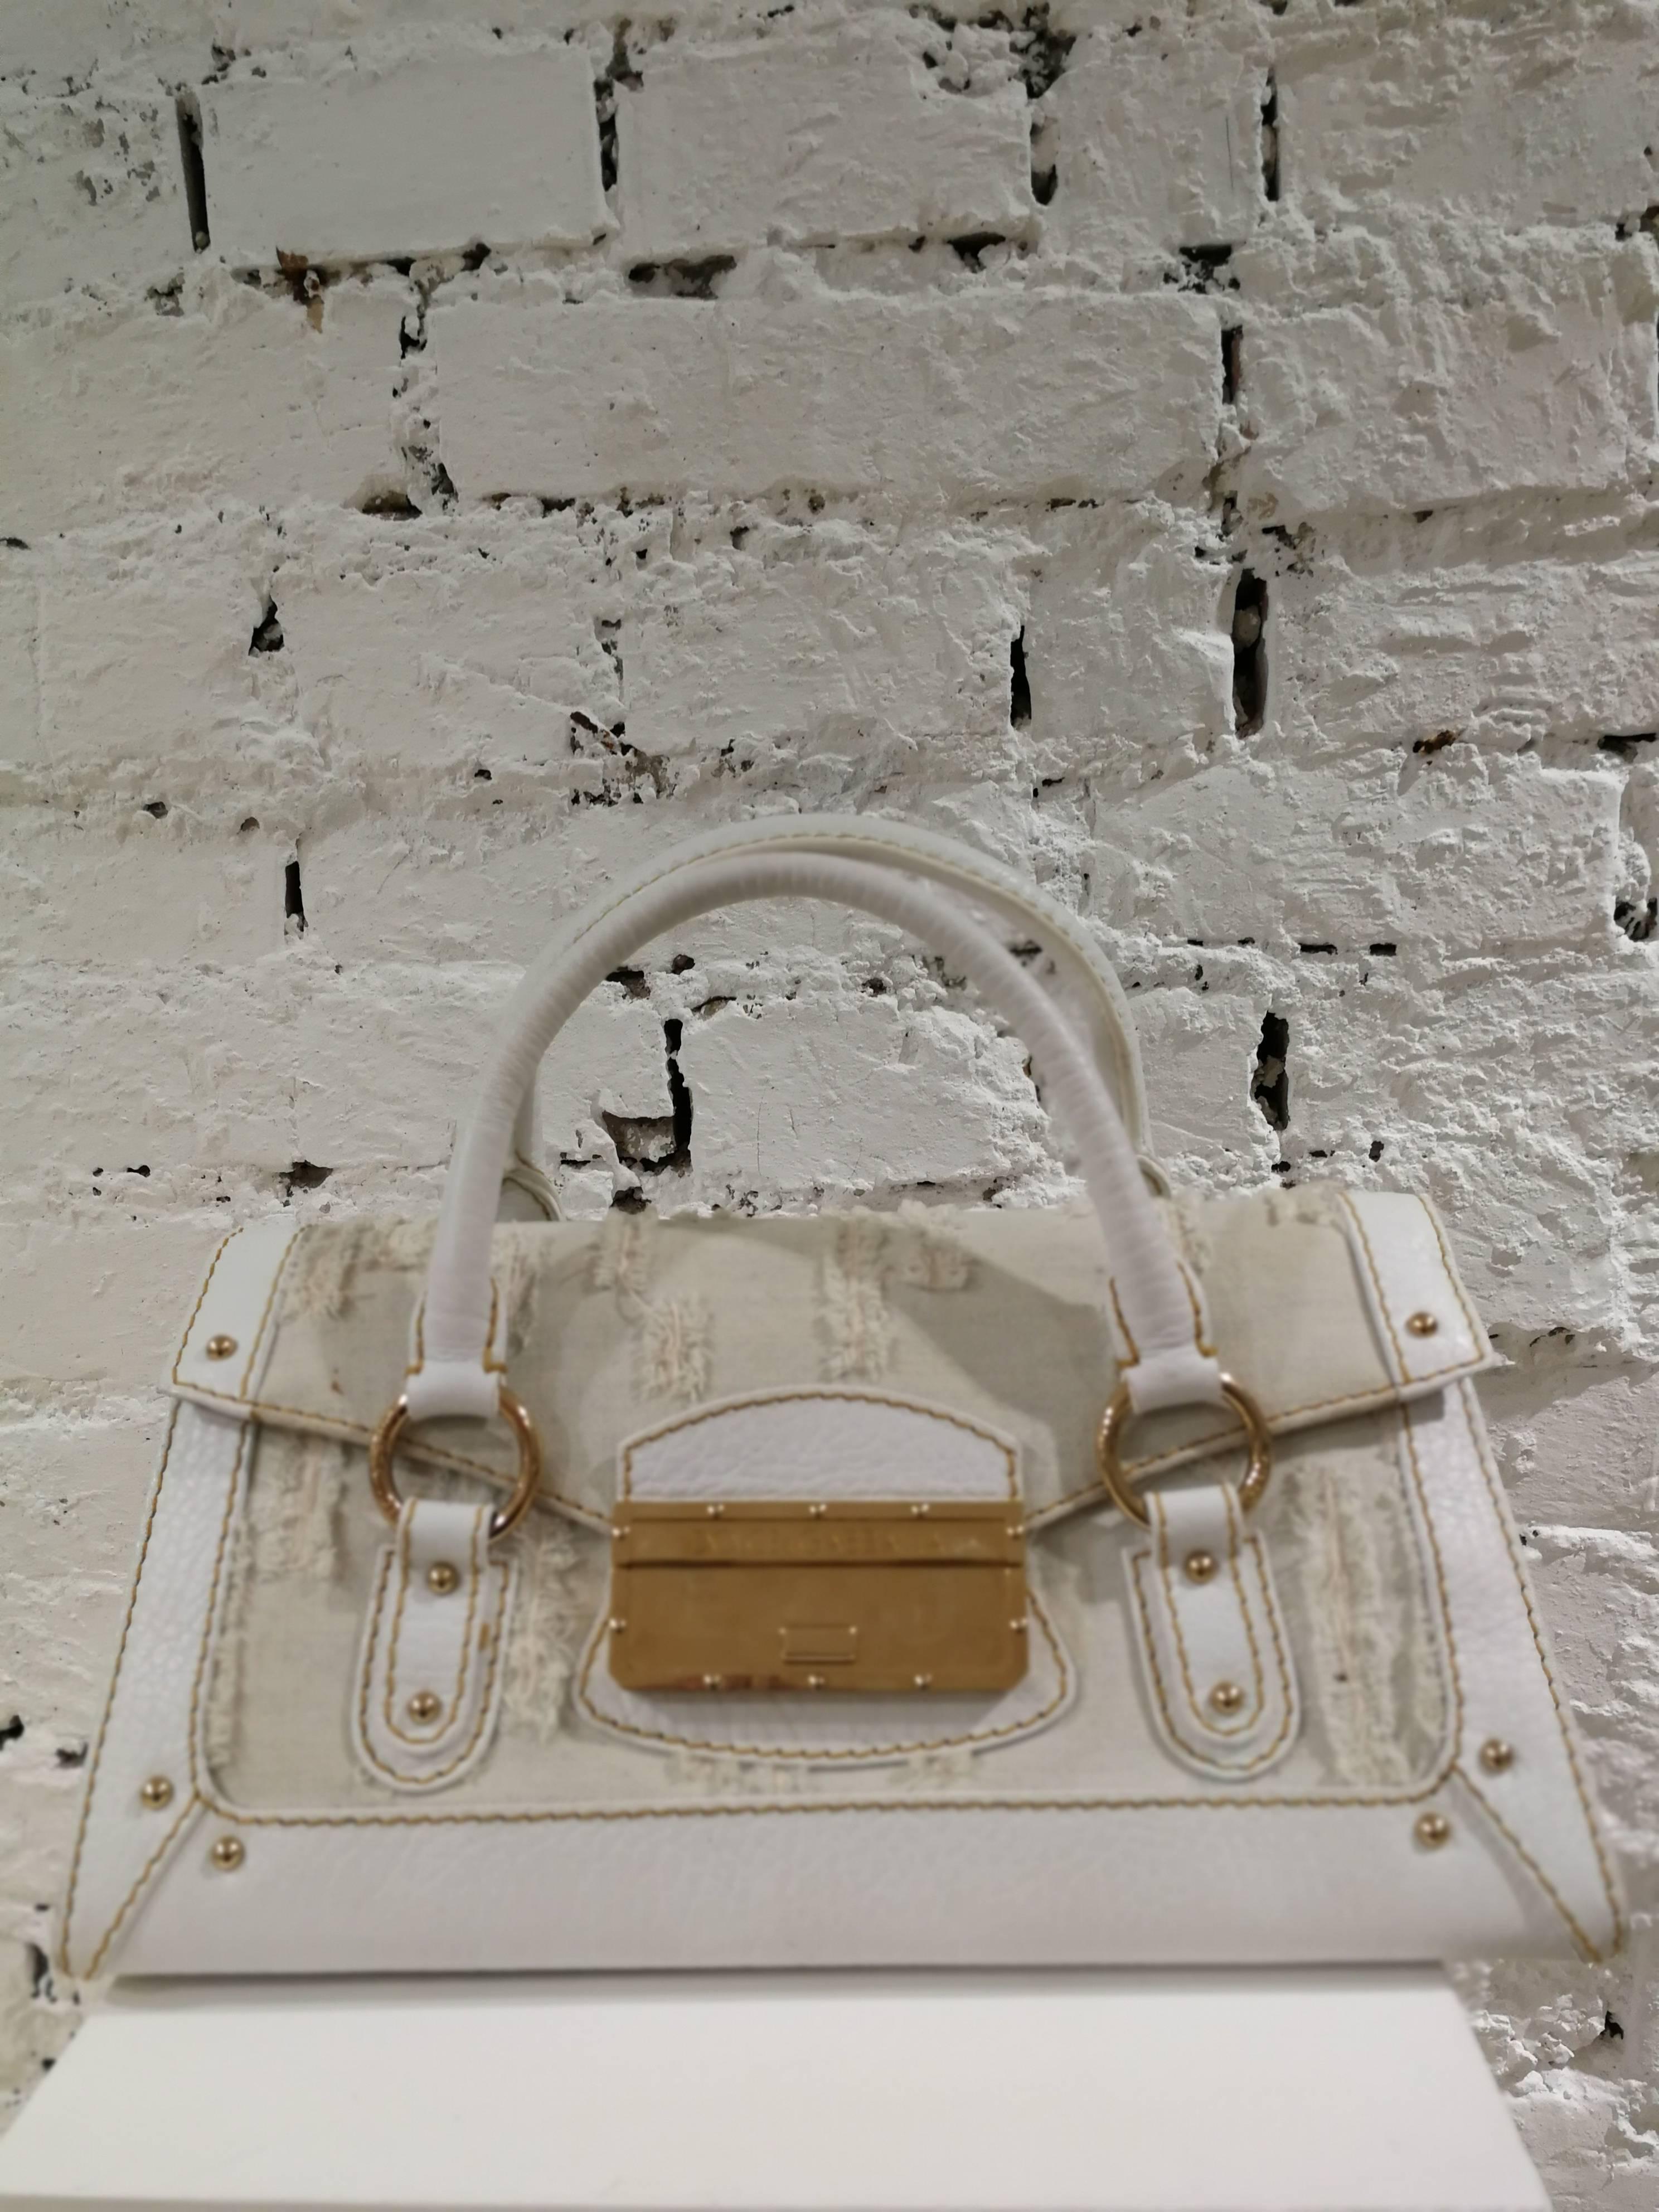 Dolce & Gabbana white leather Denim Handle Shoulder Bag

White leather with gold tone hardware handle or shoulder bag by Dolce & Gabbana
Totally made in italy

Denim patterns

Some few signs of use

Check out pictures carefully

Measurements: h 15